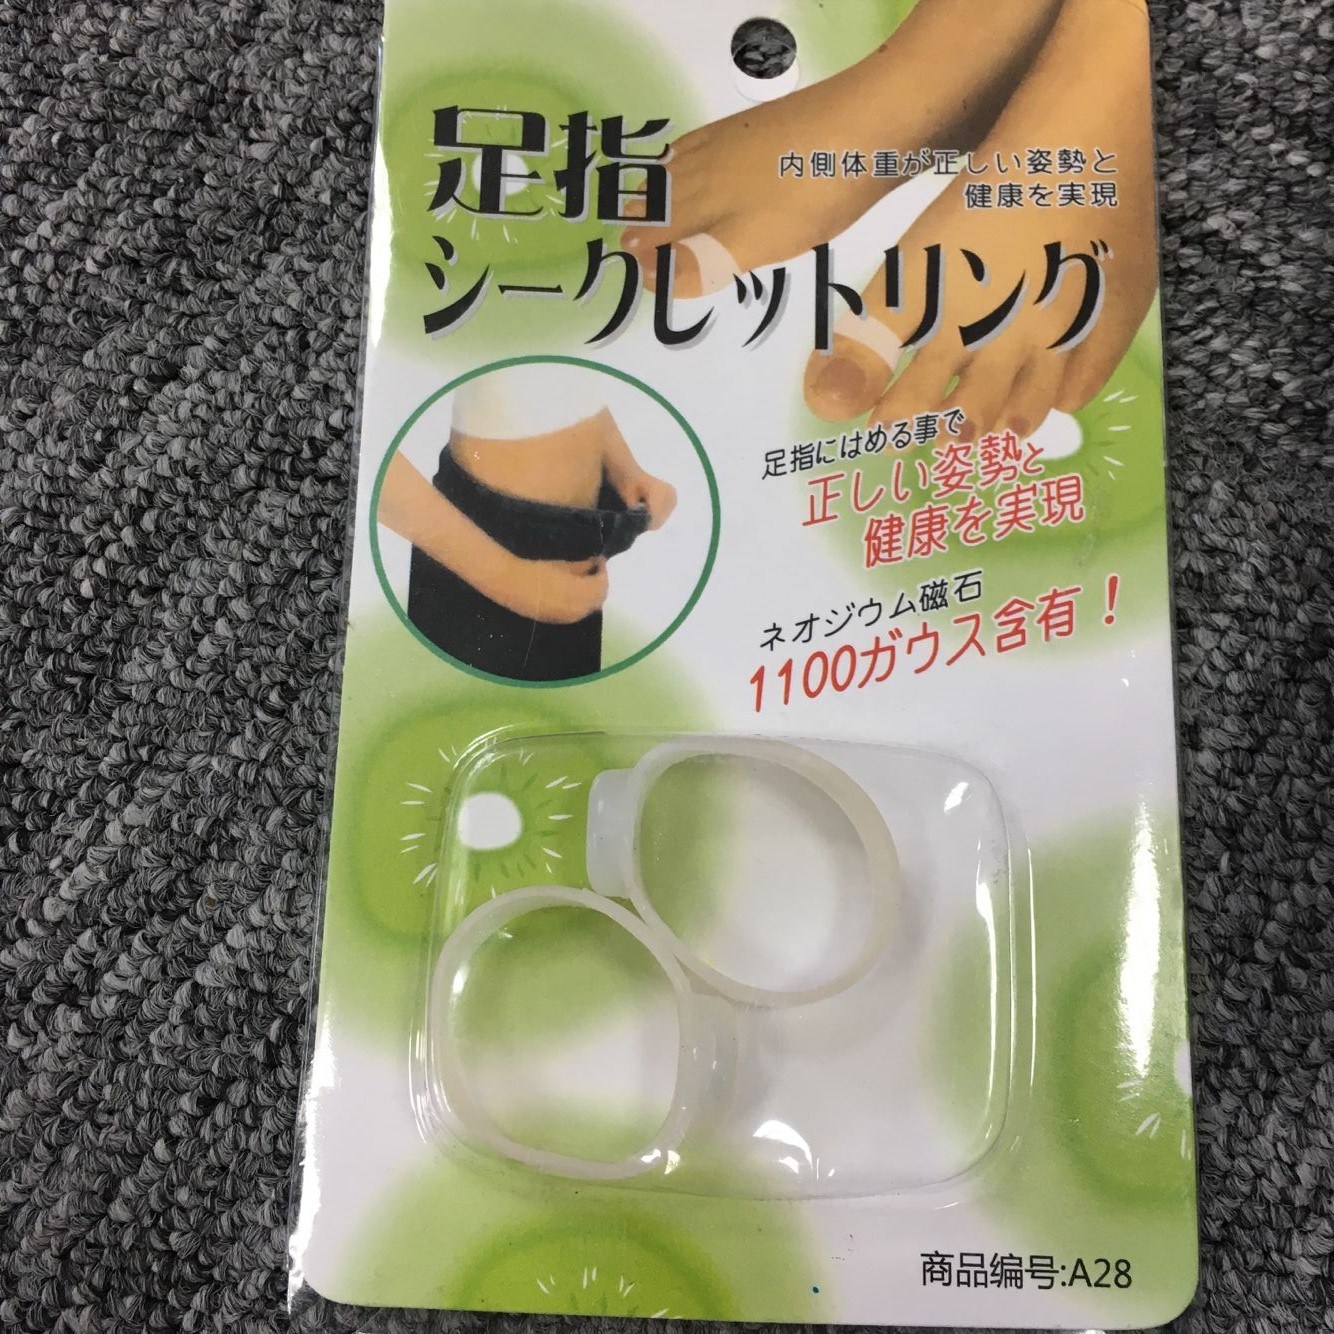 Magnetic Rings Slimming Silicone Toe Ring, Lose Weight Magnetic Weight Loss